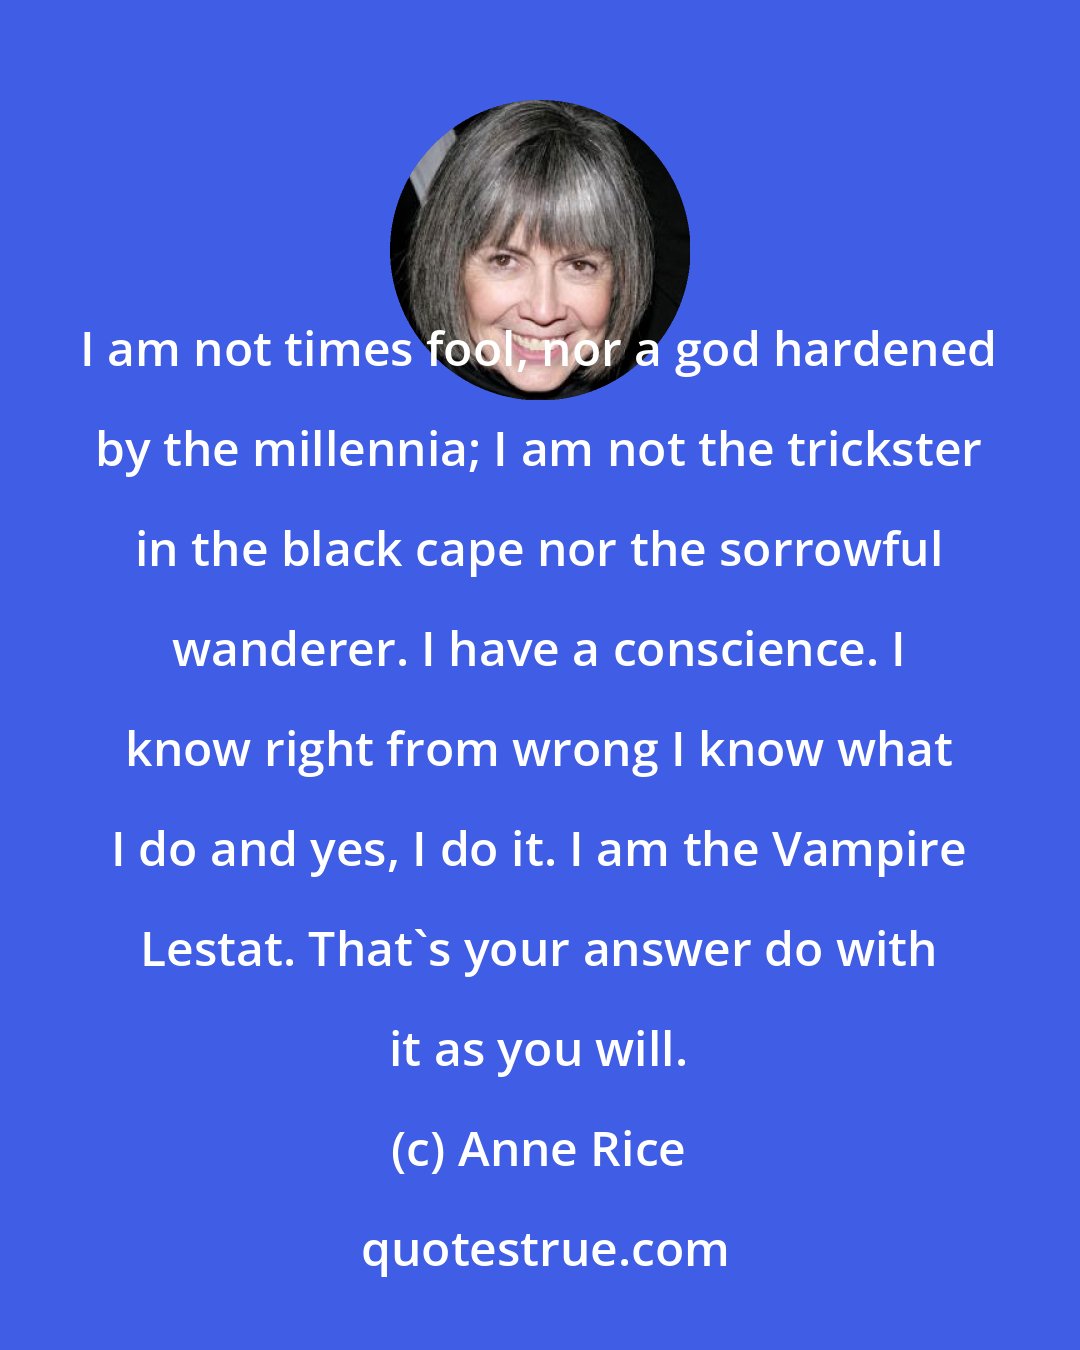 Anne Rice: I am not times fool, nor a god hardened by the millennia; I am not the trickster in the black cape nor the sorrowful wanderer. I have a conscience. I know right from wrong I know what I do and yes, I do it. I am the Vampire Lestat. That's your answer do with it as you will.